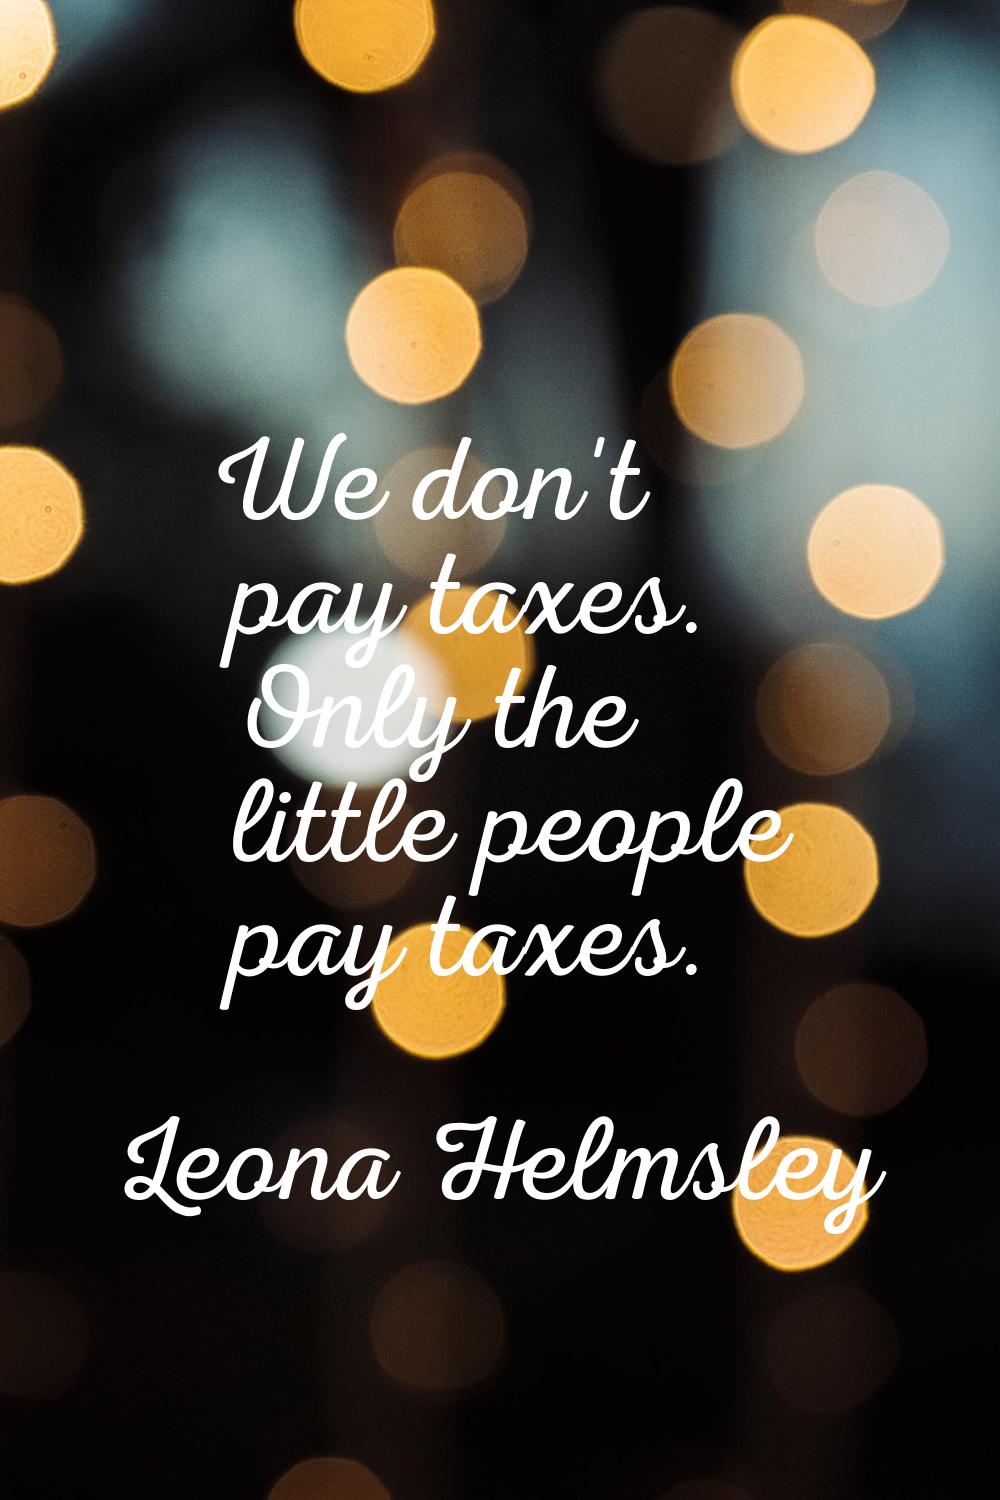 We don't pay taxes. Only the little people pay taxes.